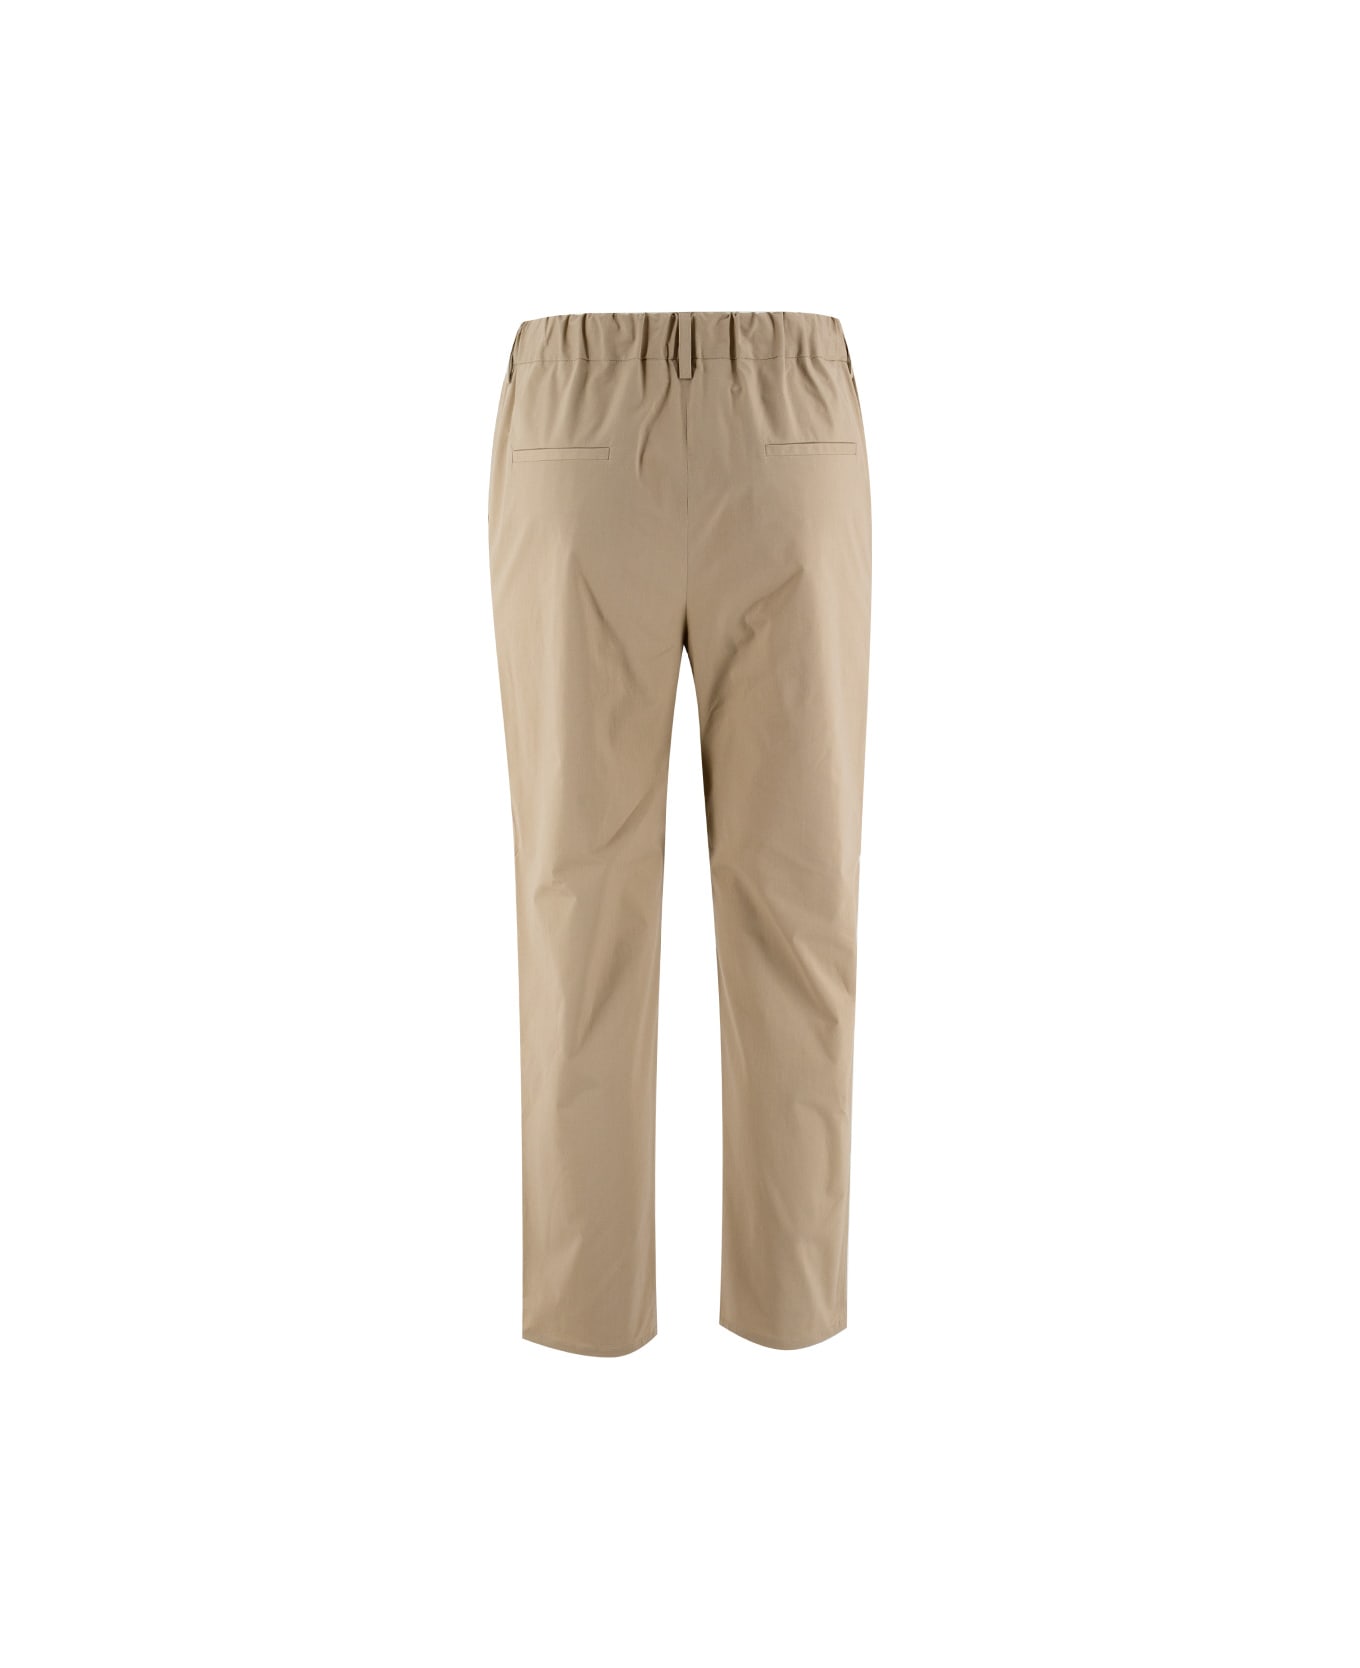 Antonelli Trousers - BROWN ボトムス